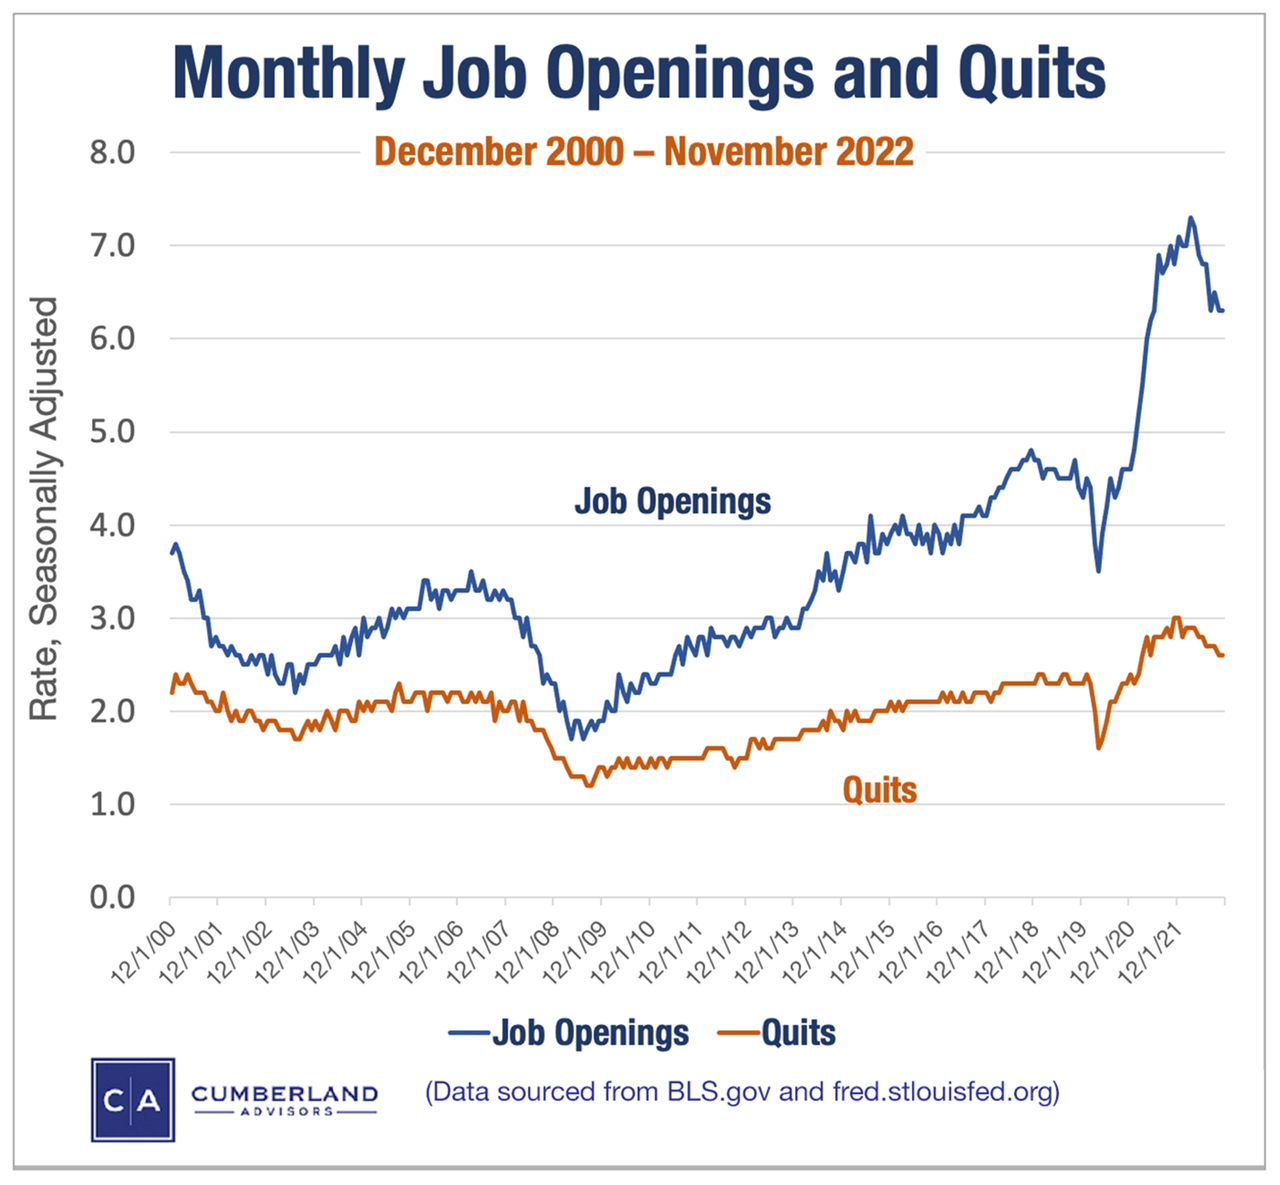 Monthly Job Openings and Quits